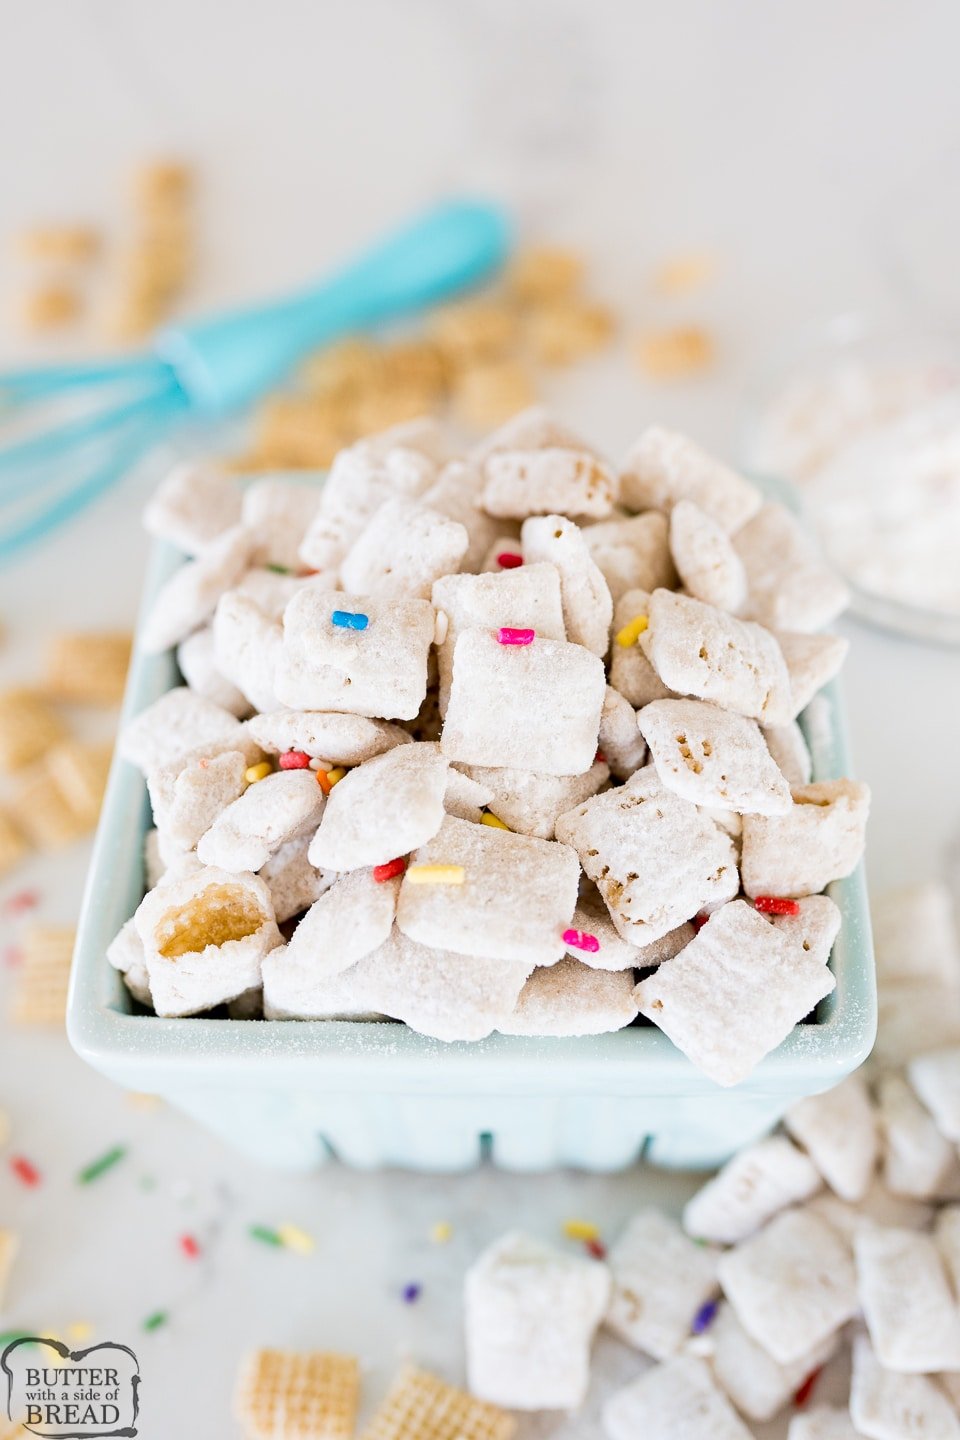 Funfetti Chex Mix is a sweet & crunchy, no bake cereal dessert that is loaded with that birthday cake flavor. With only 5 ingredients and about 5 minutes of work, this is you're new go-to Chex mix!